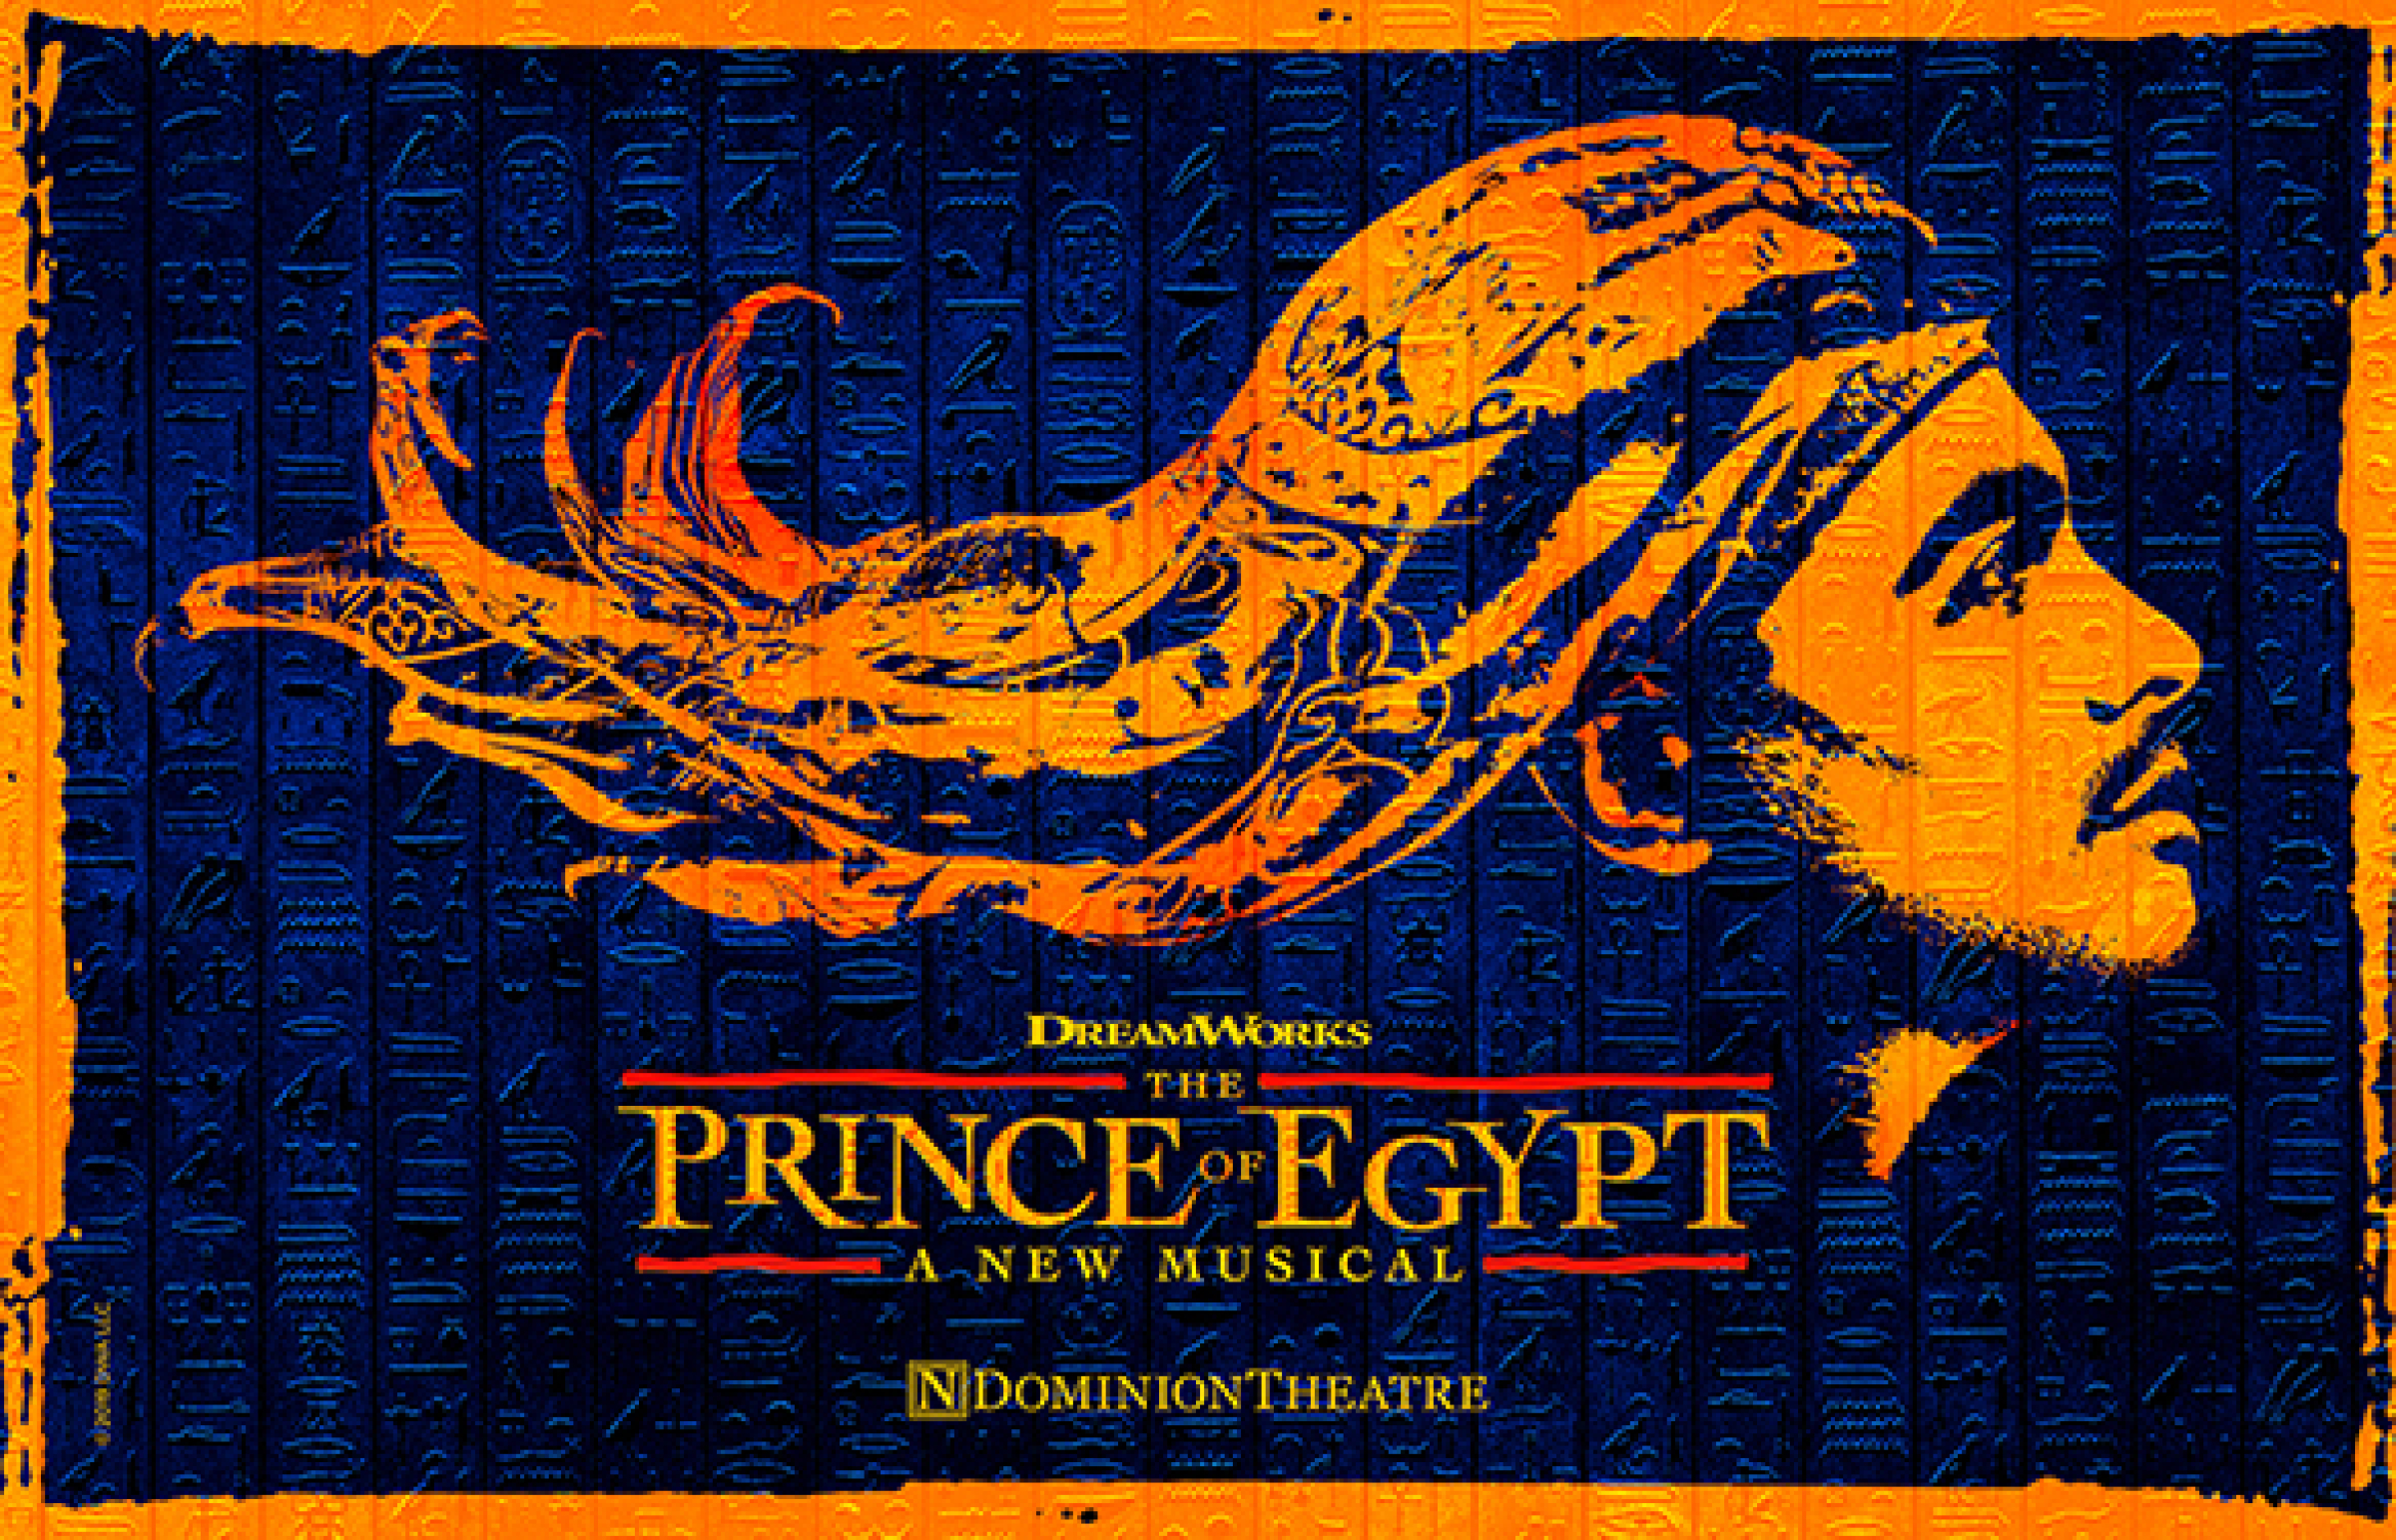 Prince of Egypt musical reopening in London in July